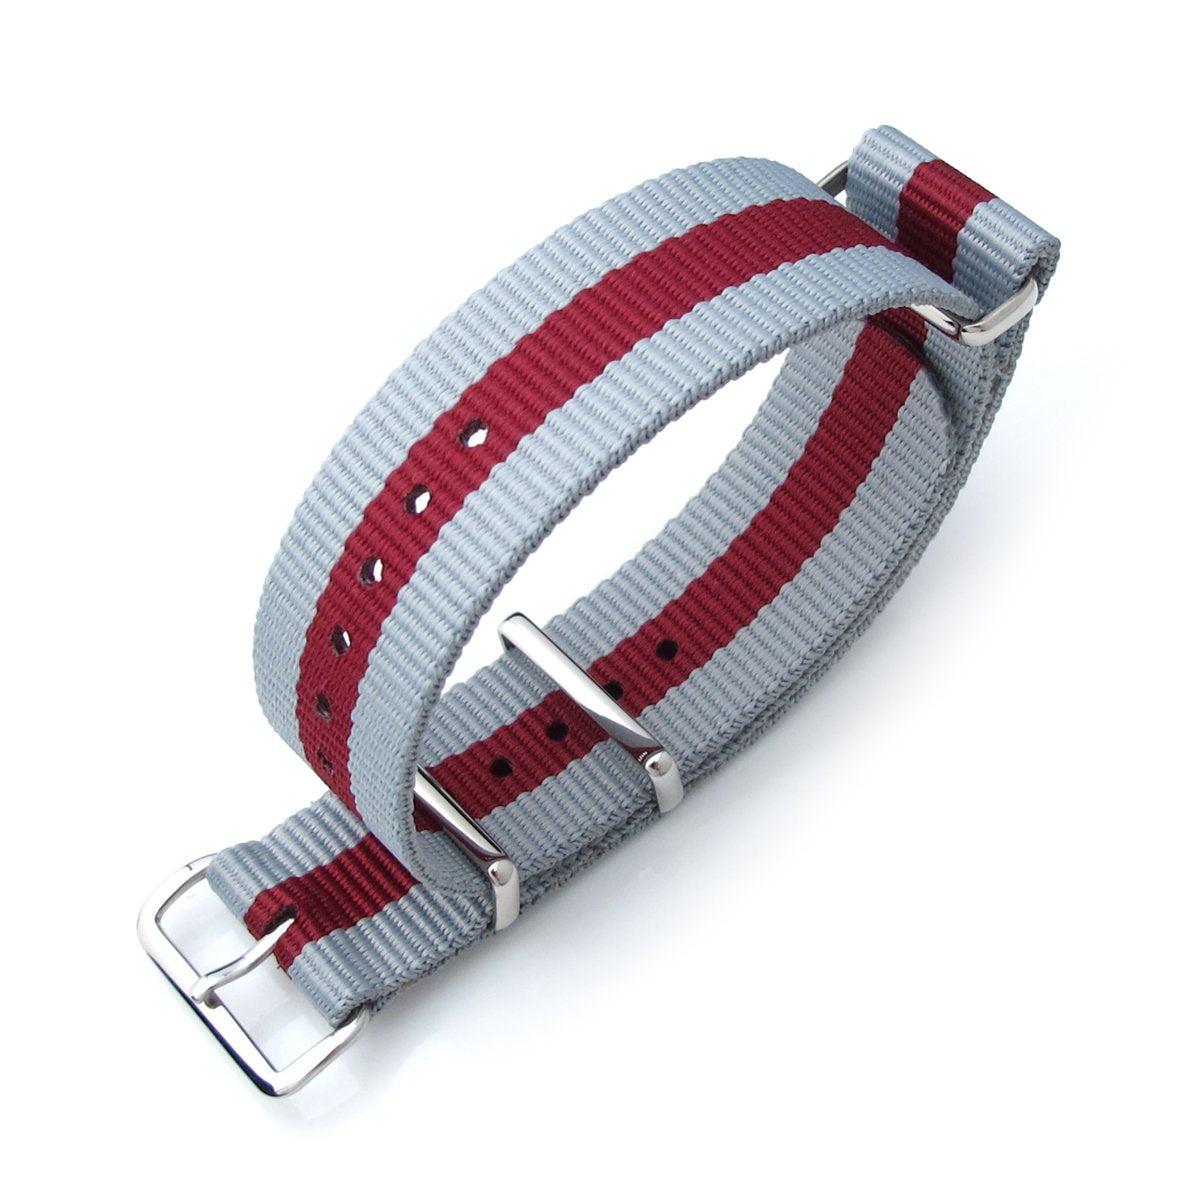 MiLTAT 20mm or 22mm G10 NATO Military Watch Strap Ballistic Nylon Armband Polished Grey & Burgundy Red Strapcode Watch Bands